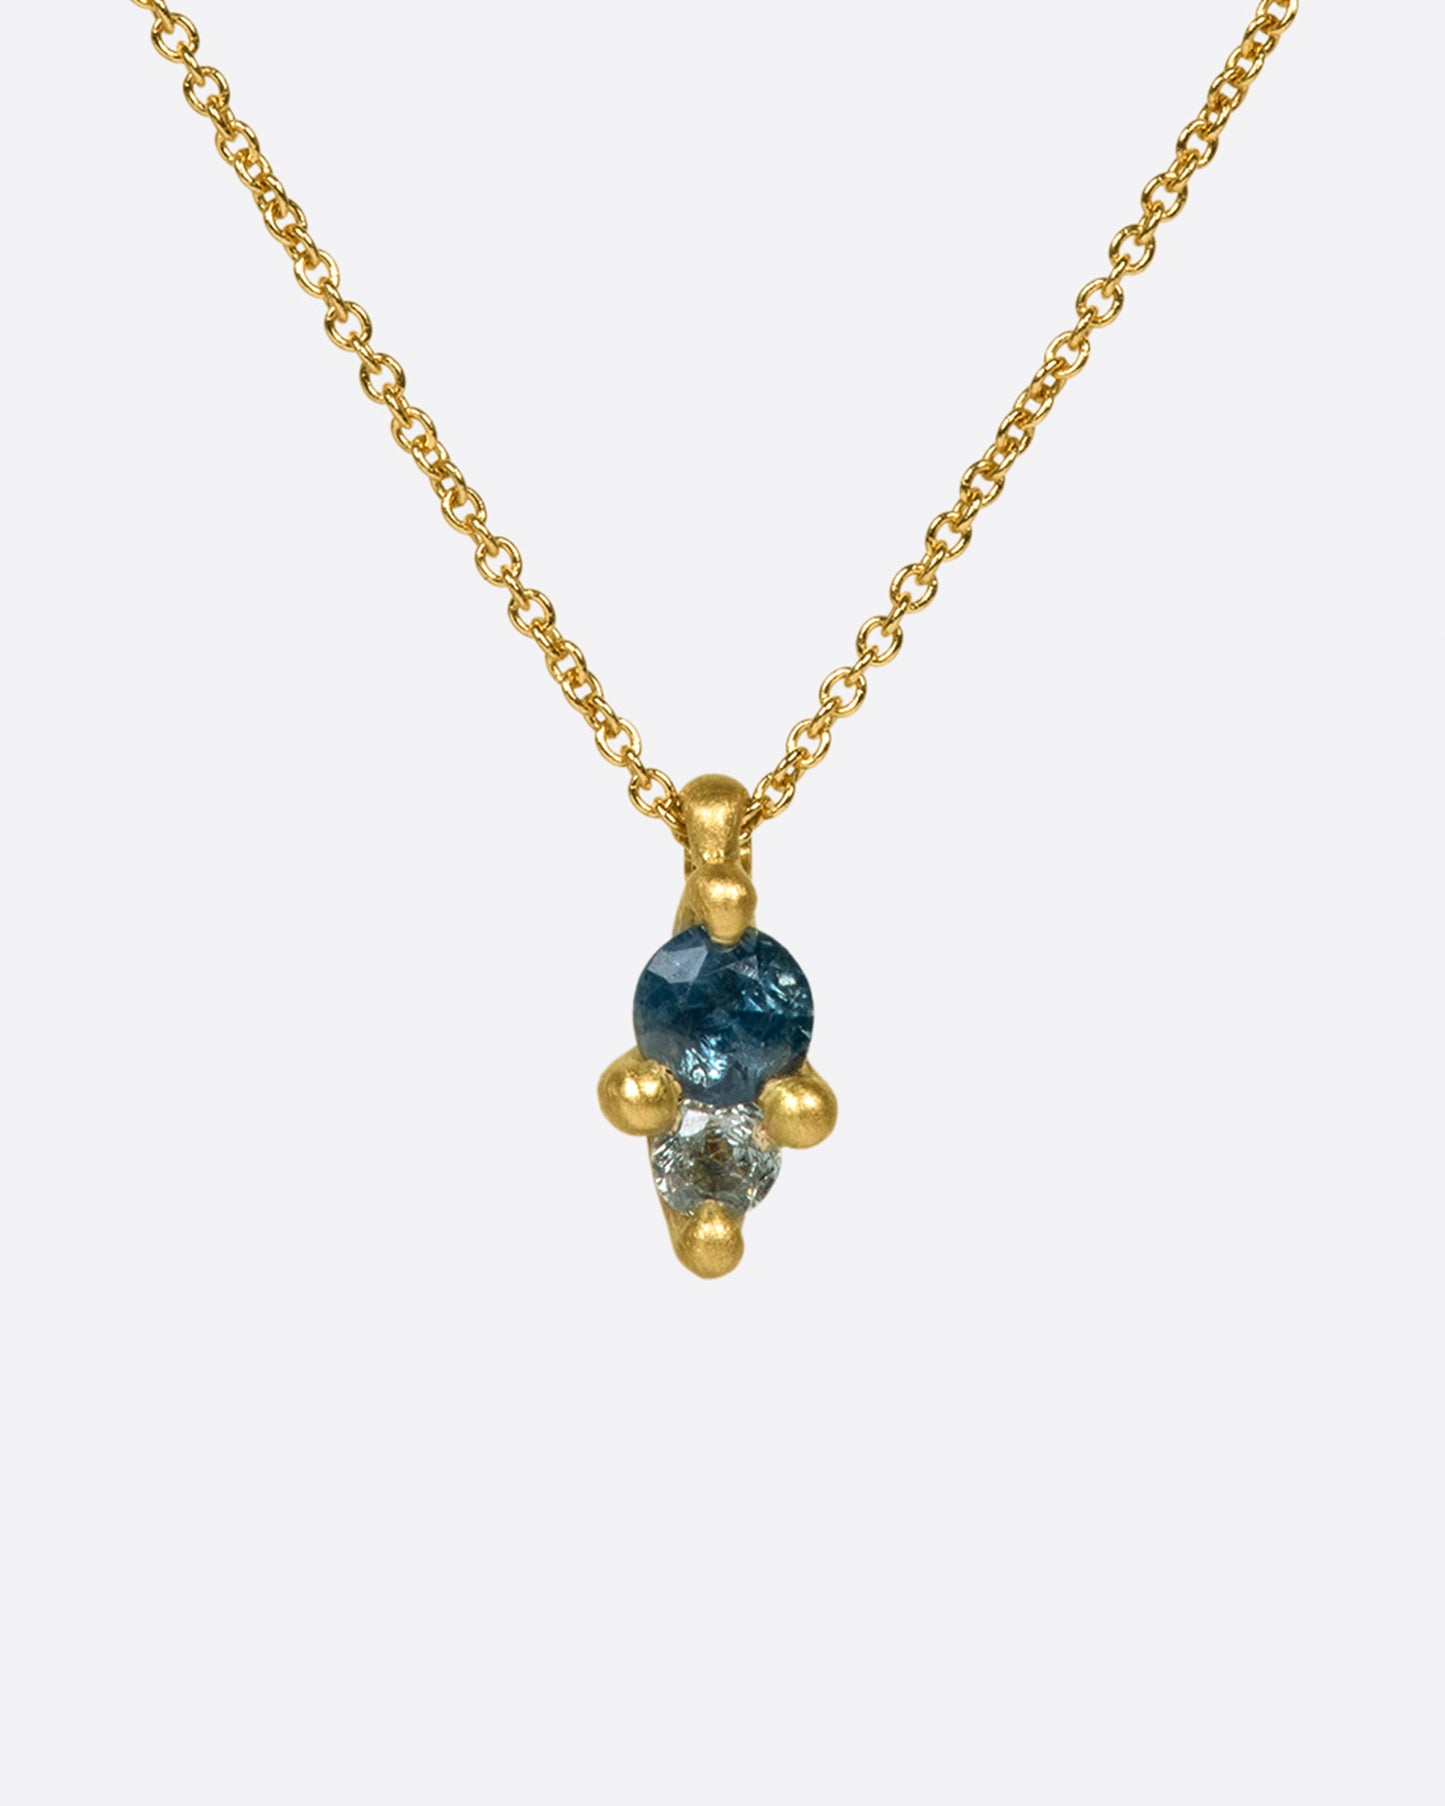 A pendant with two sapphires; one blue and one gray, set in matte gold prongs on a cable chain necklace.